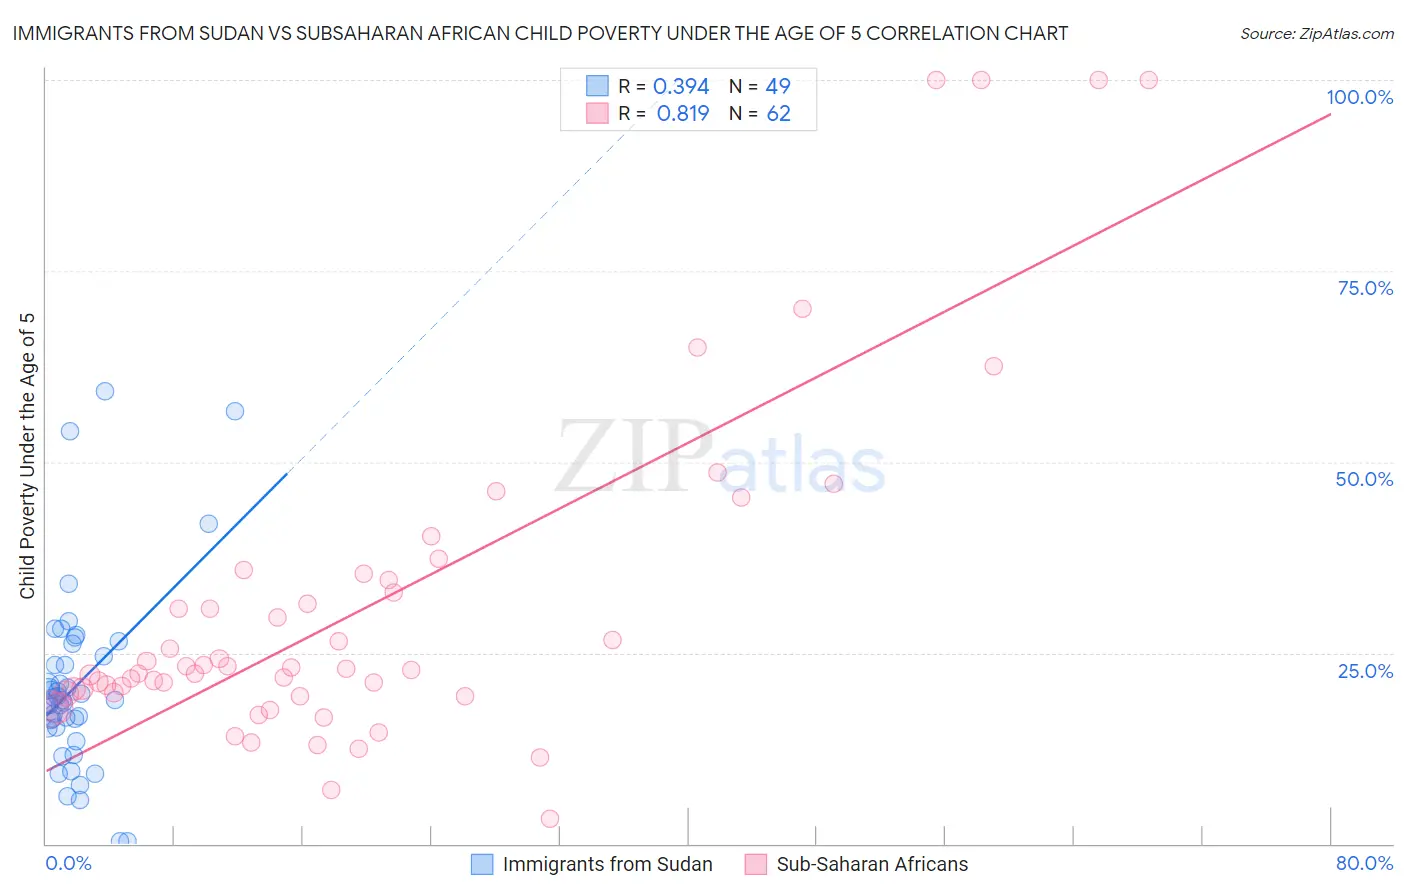 Immigrants from Sudan vs Subsaharan African Child Poverty Under the Age of 5